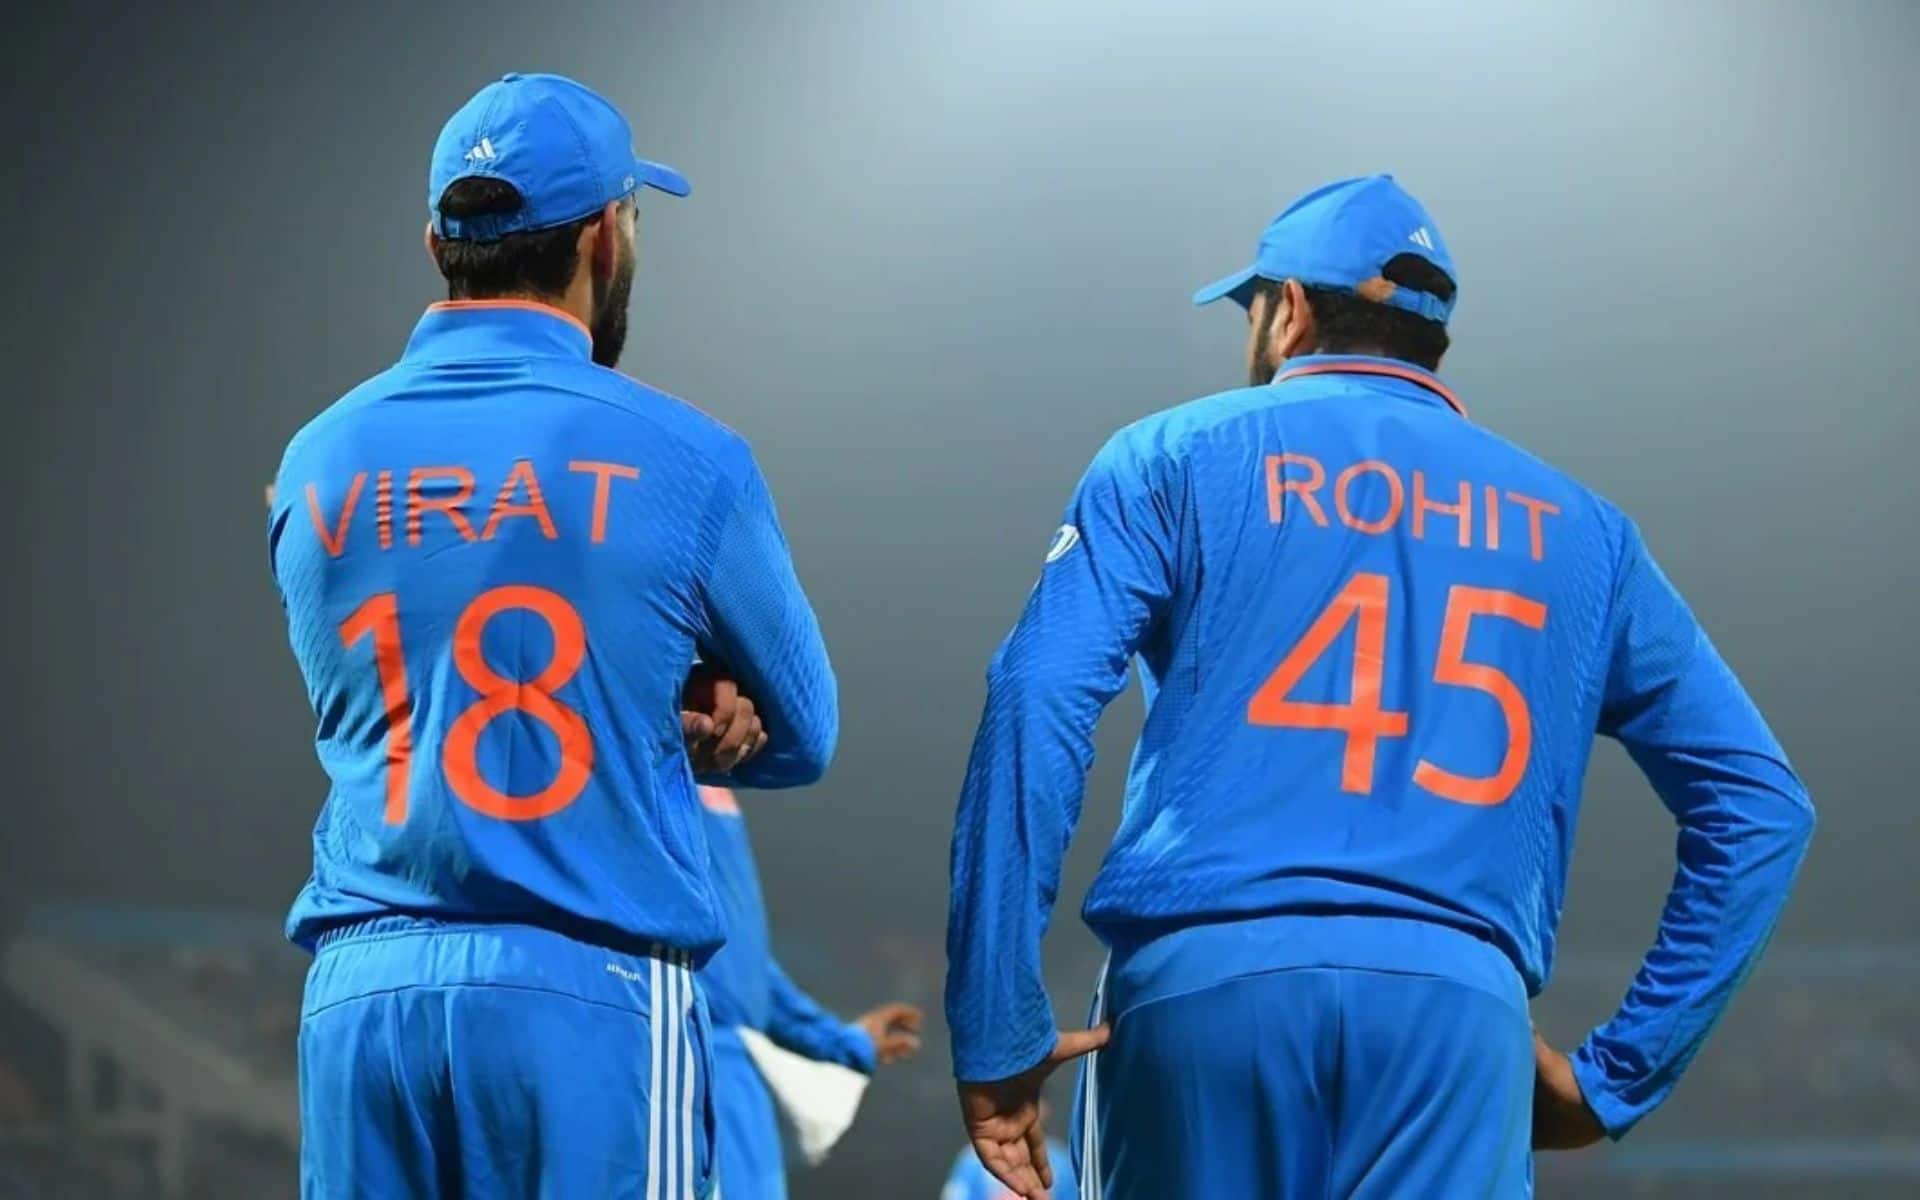 Rohit Sharma and Virat Kohli are two of the top 5 run scorers in T20 World Cup history [X.com]